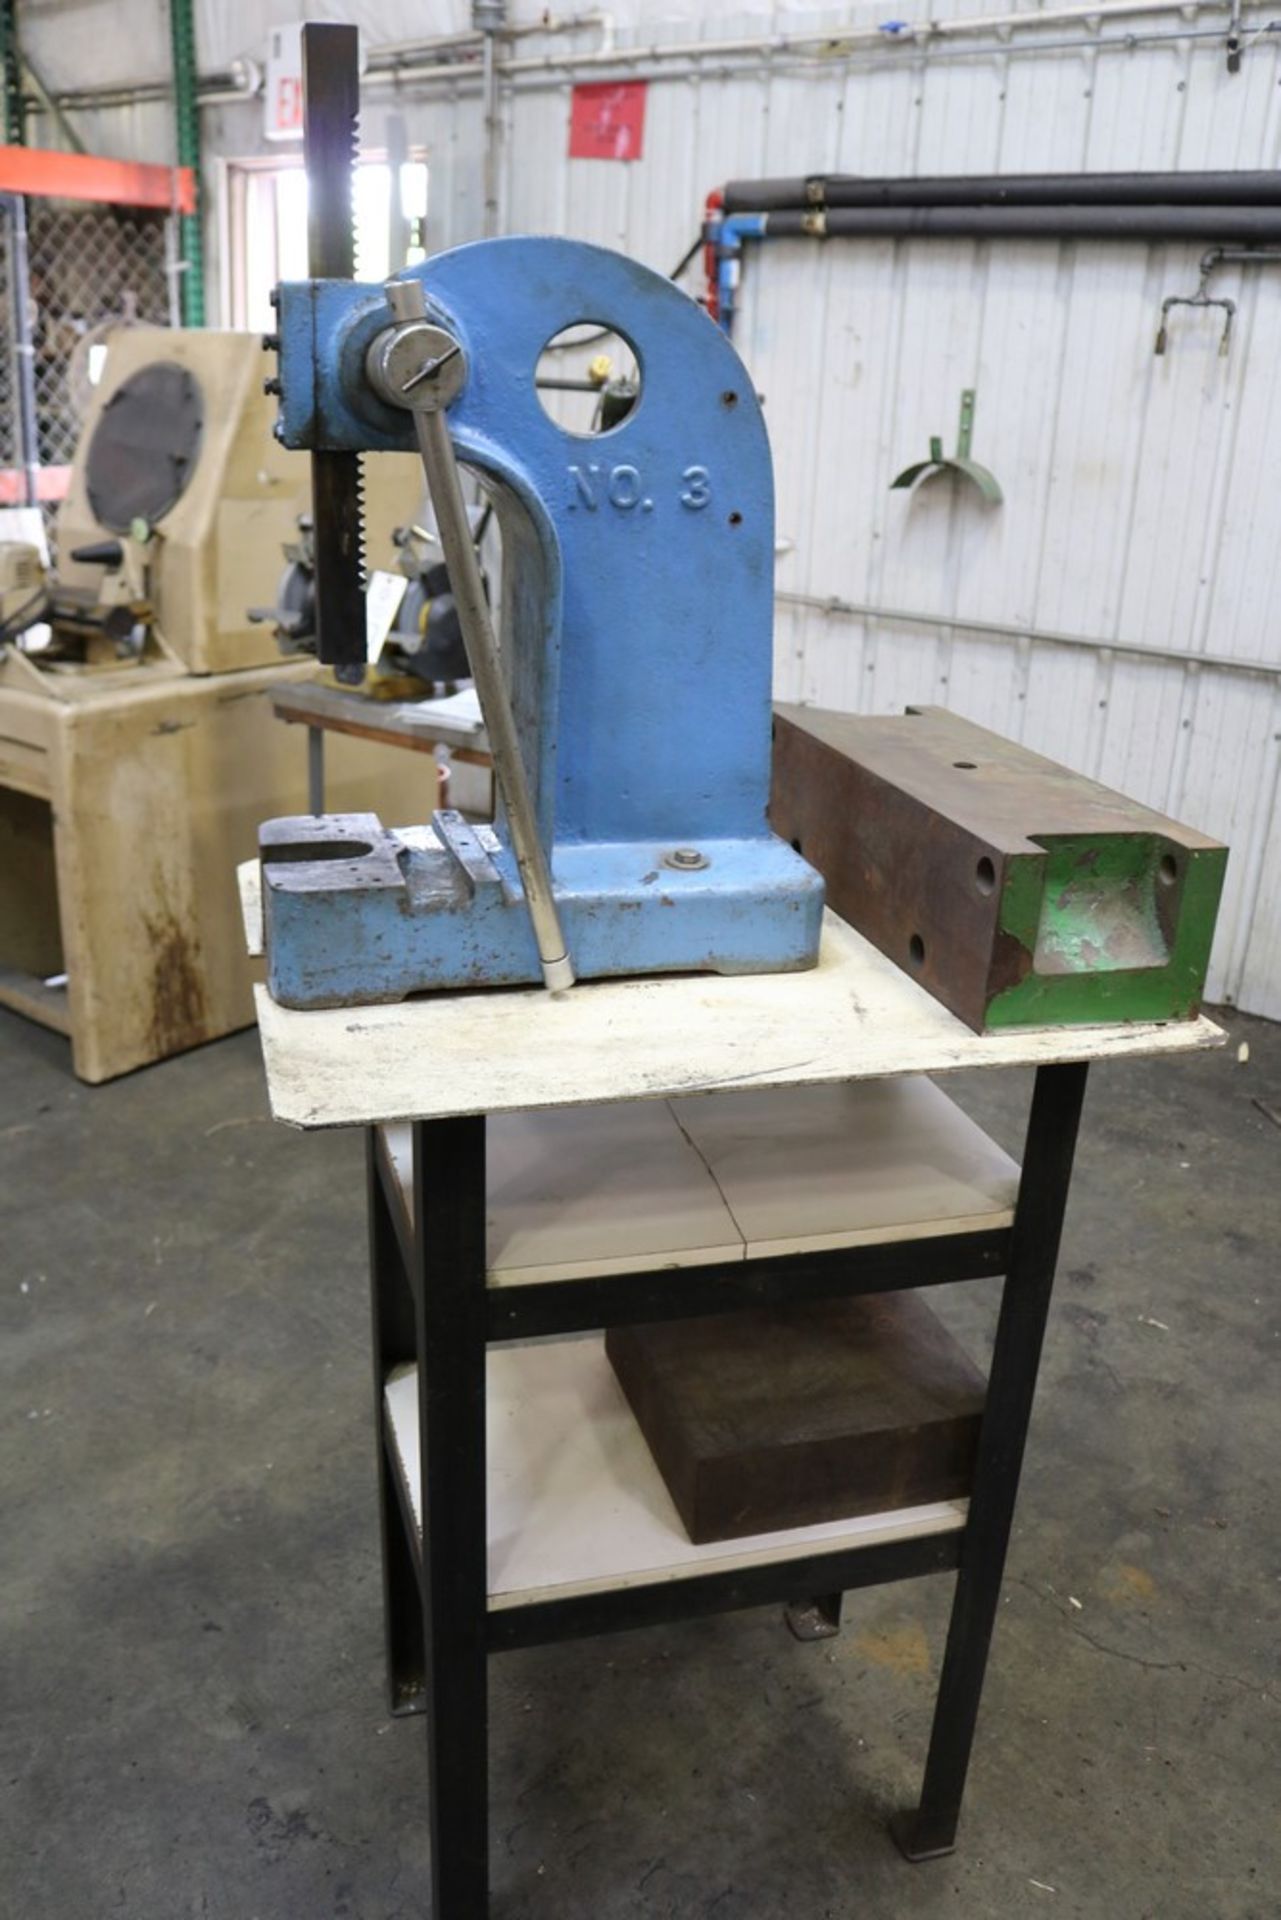 Heavy Duty 13" Arbor Press on Stand - Image 5 of 6